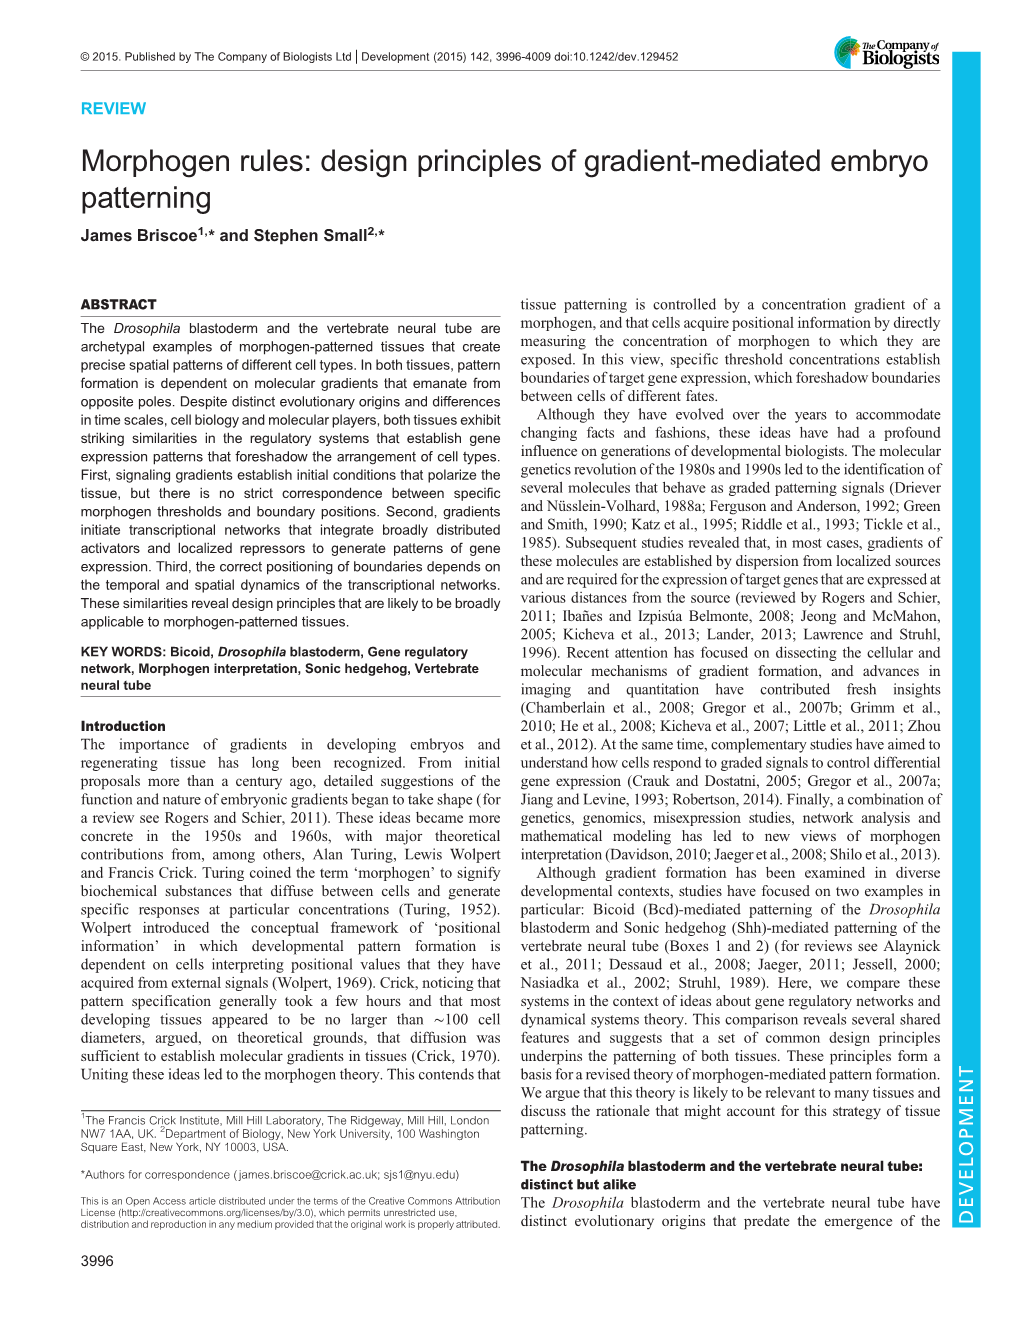 Morphogen Rules: Design Principles of Gradient-Mediated Embryo Patterning James Briscoe1,* and Stephen Small2,*